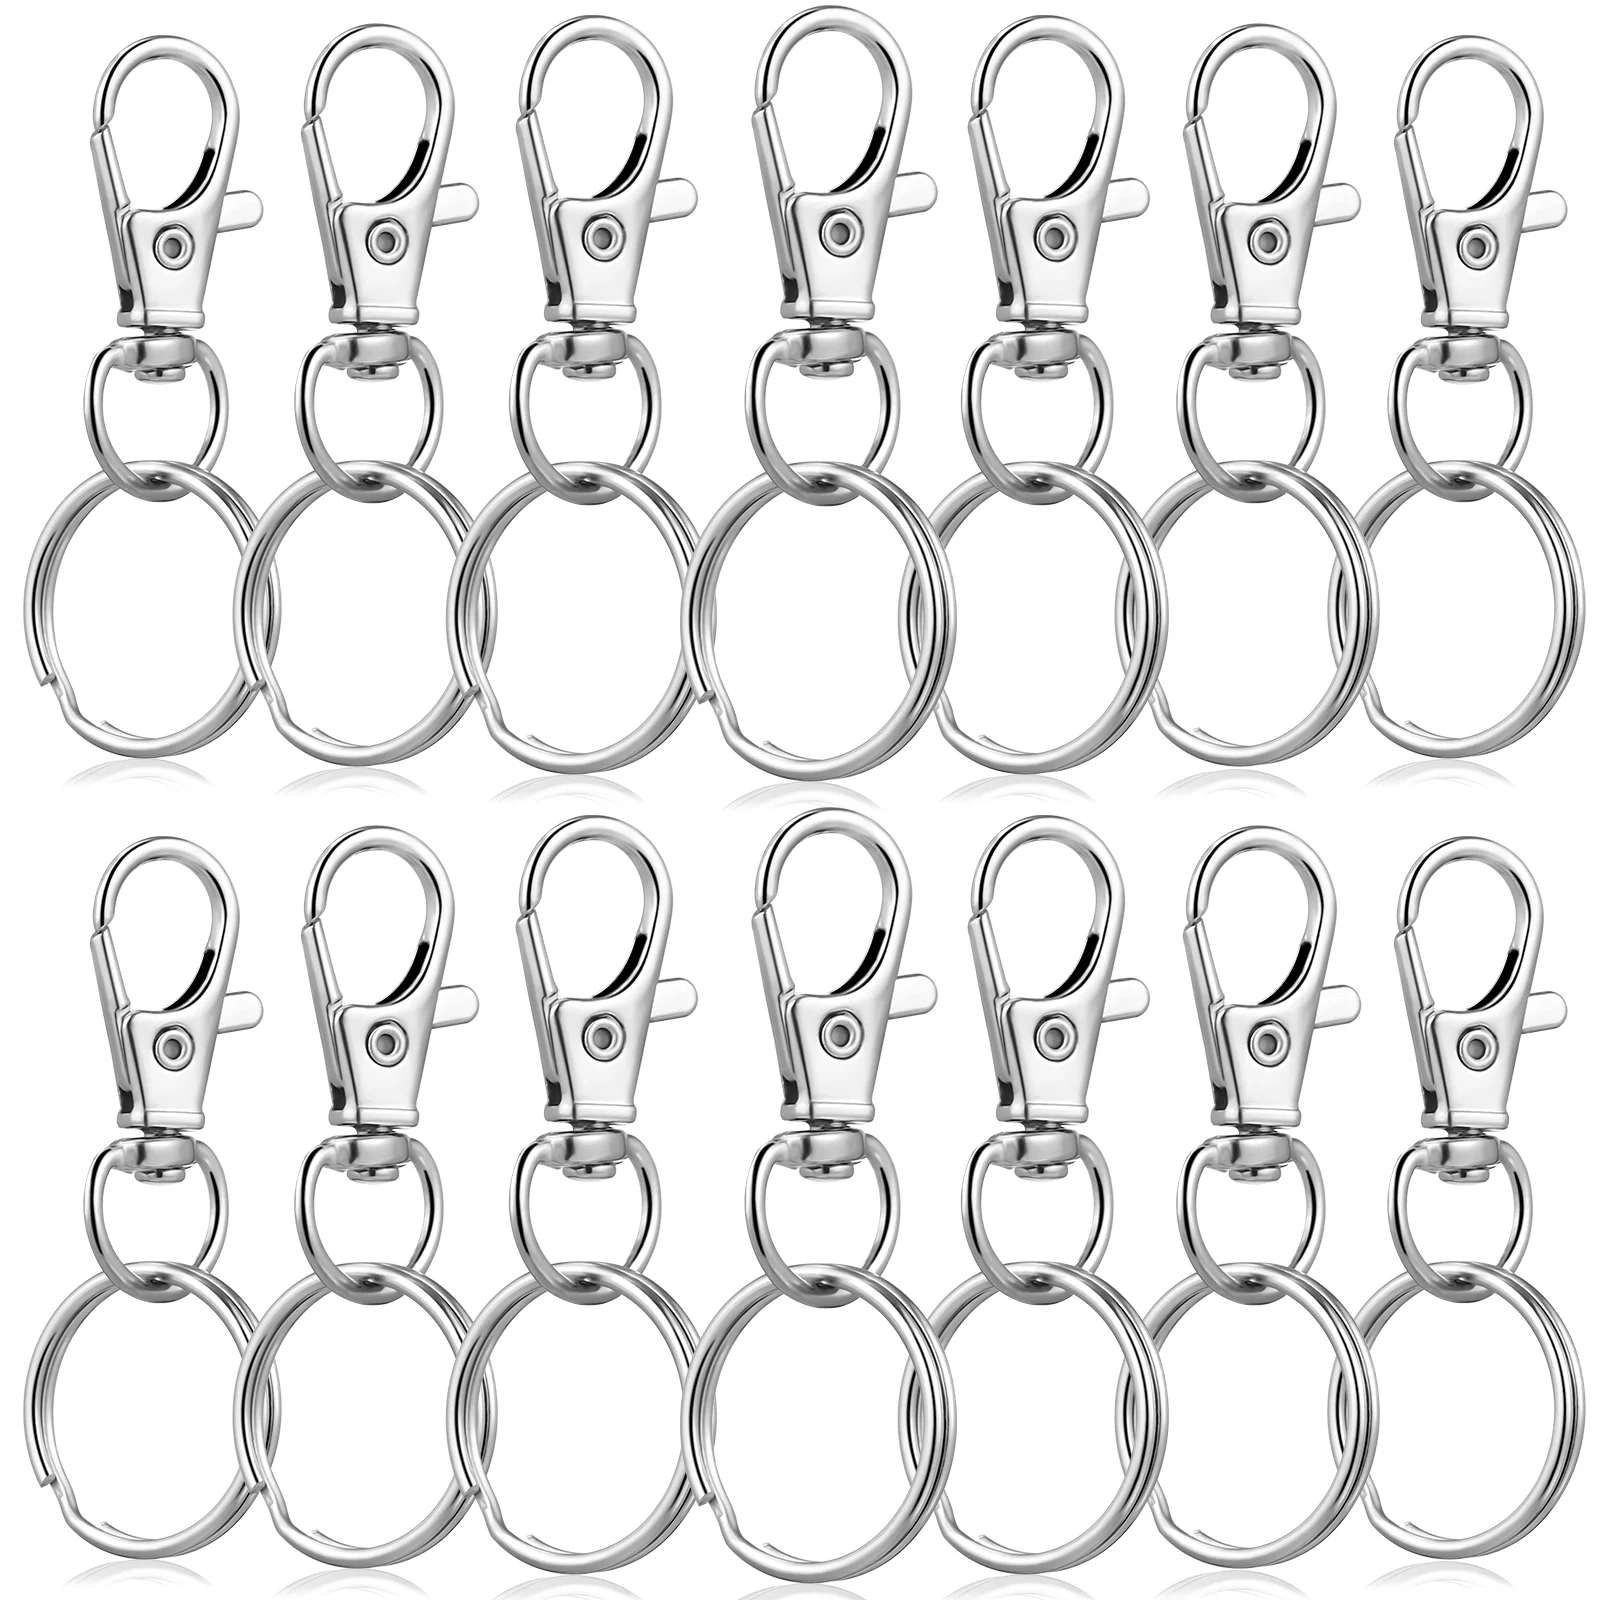 

60 Sets Dog Key Ring Swivel Snap Hook Chain Clip Keychains Lanyards Crafts Accessories Zinc Alloy